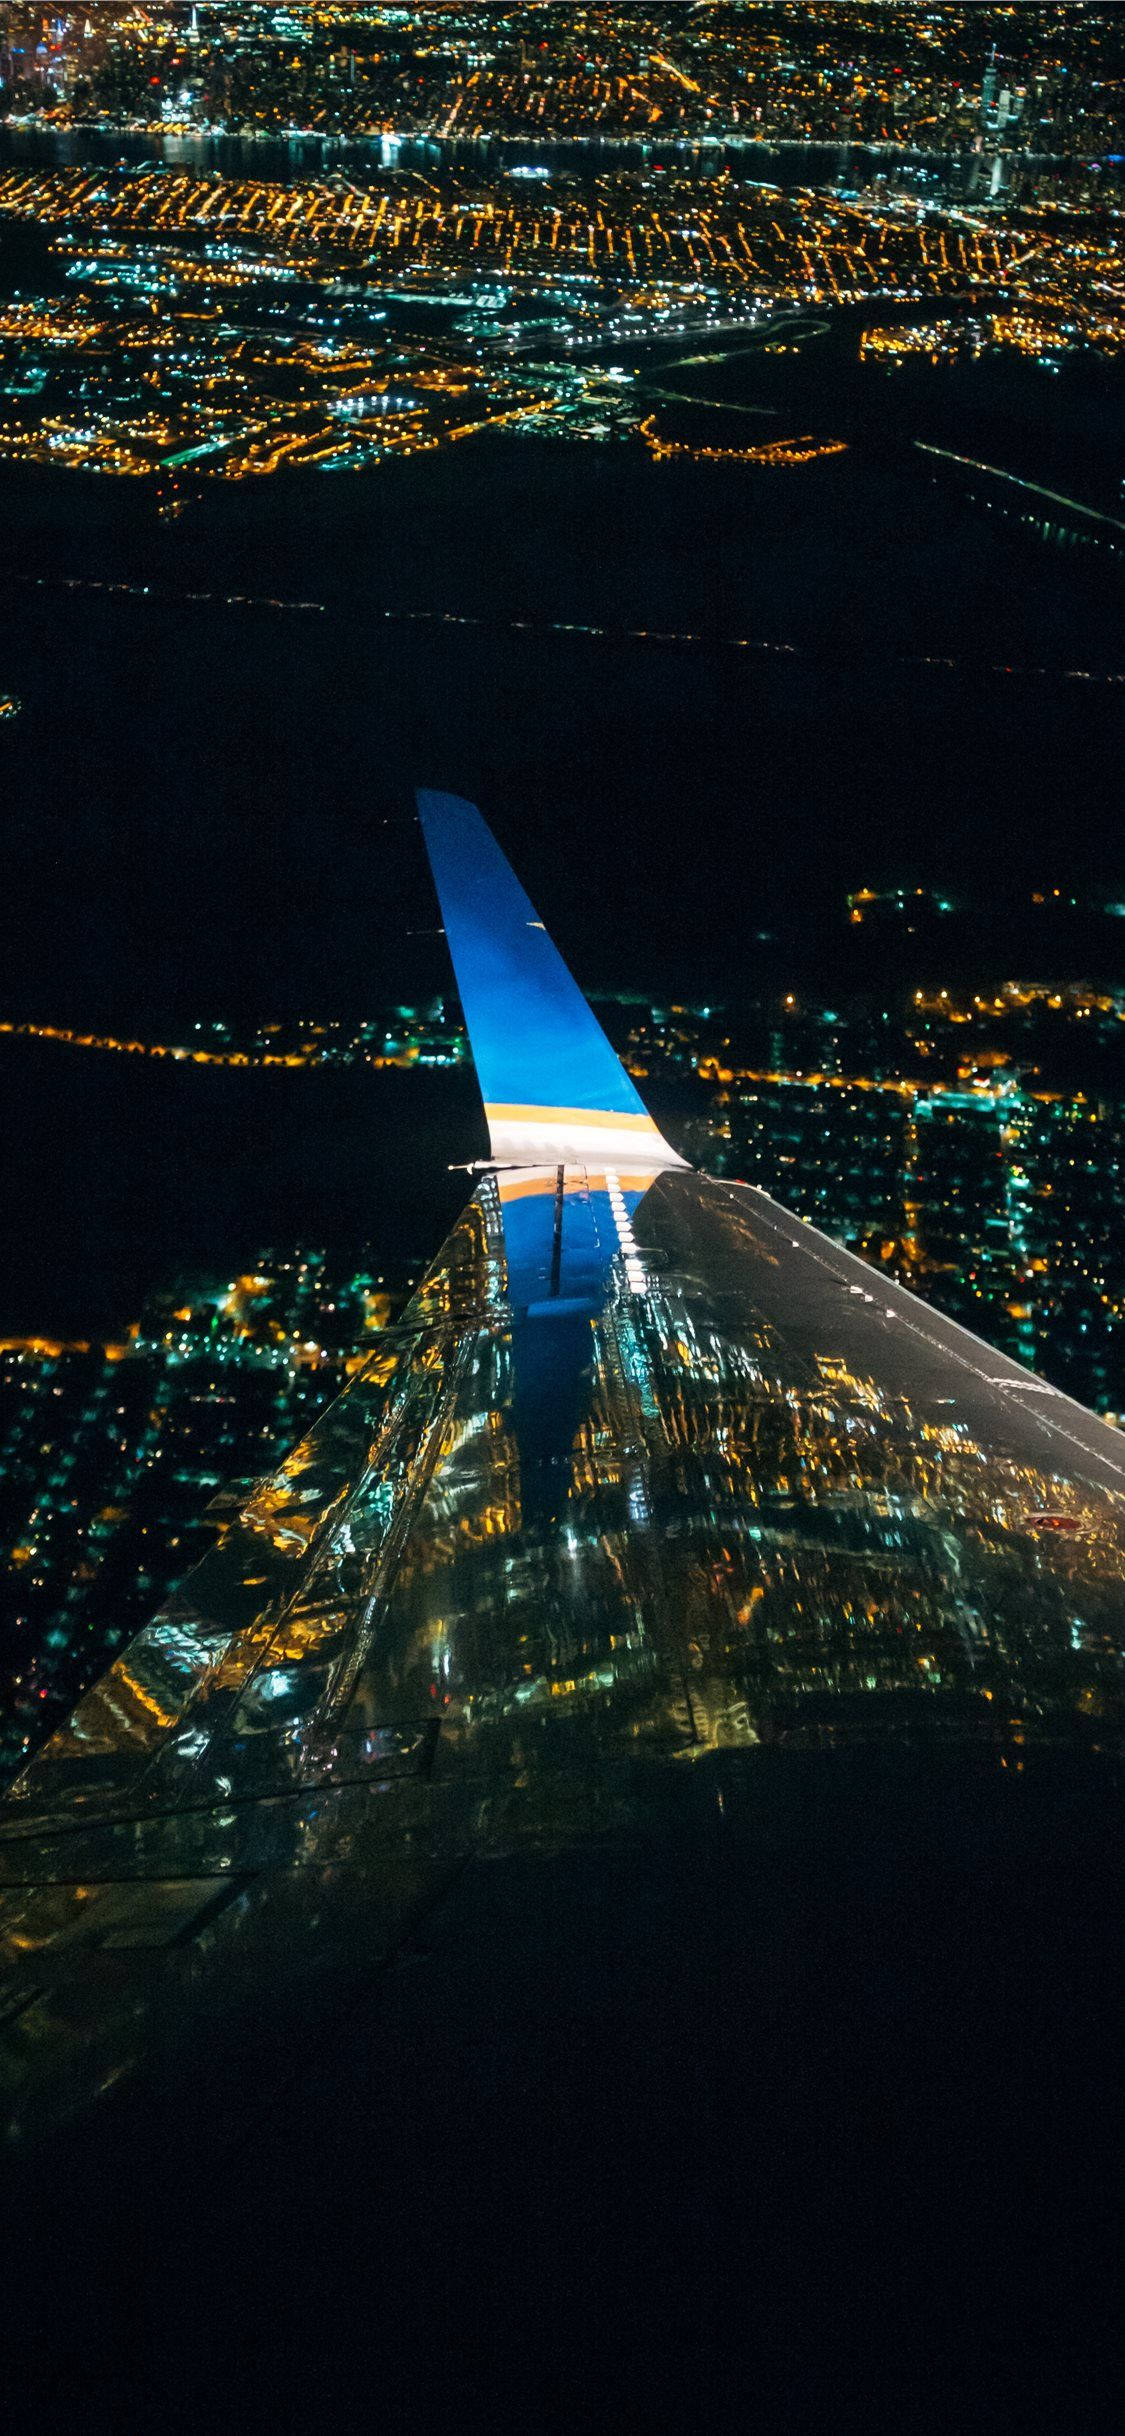 Night View Of Flying Airplane Android Background